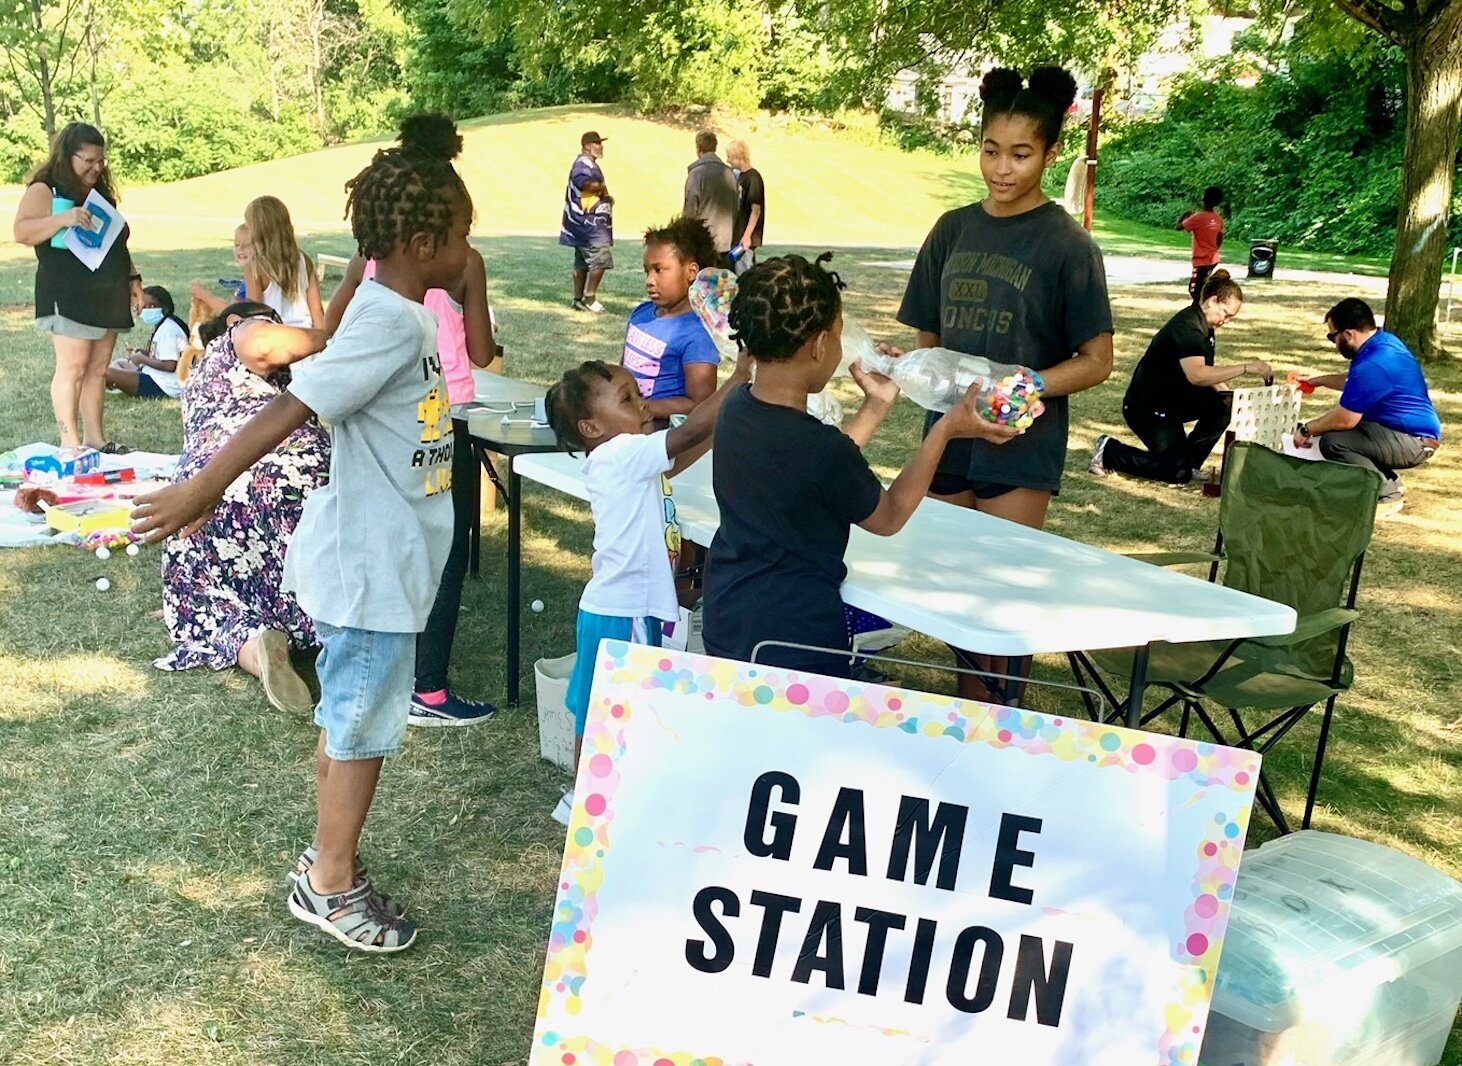 Games were a highlight of National Night Out in Kalamazoo’s Eastside Neighborhood at Rockwell Park. Photo by Al Jones